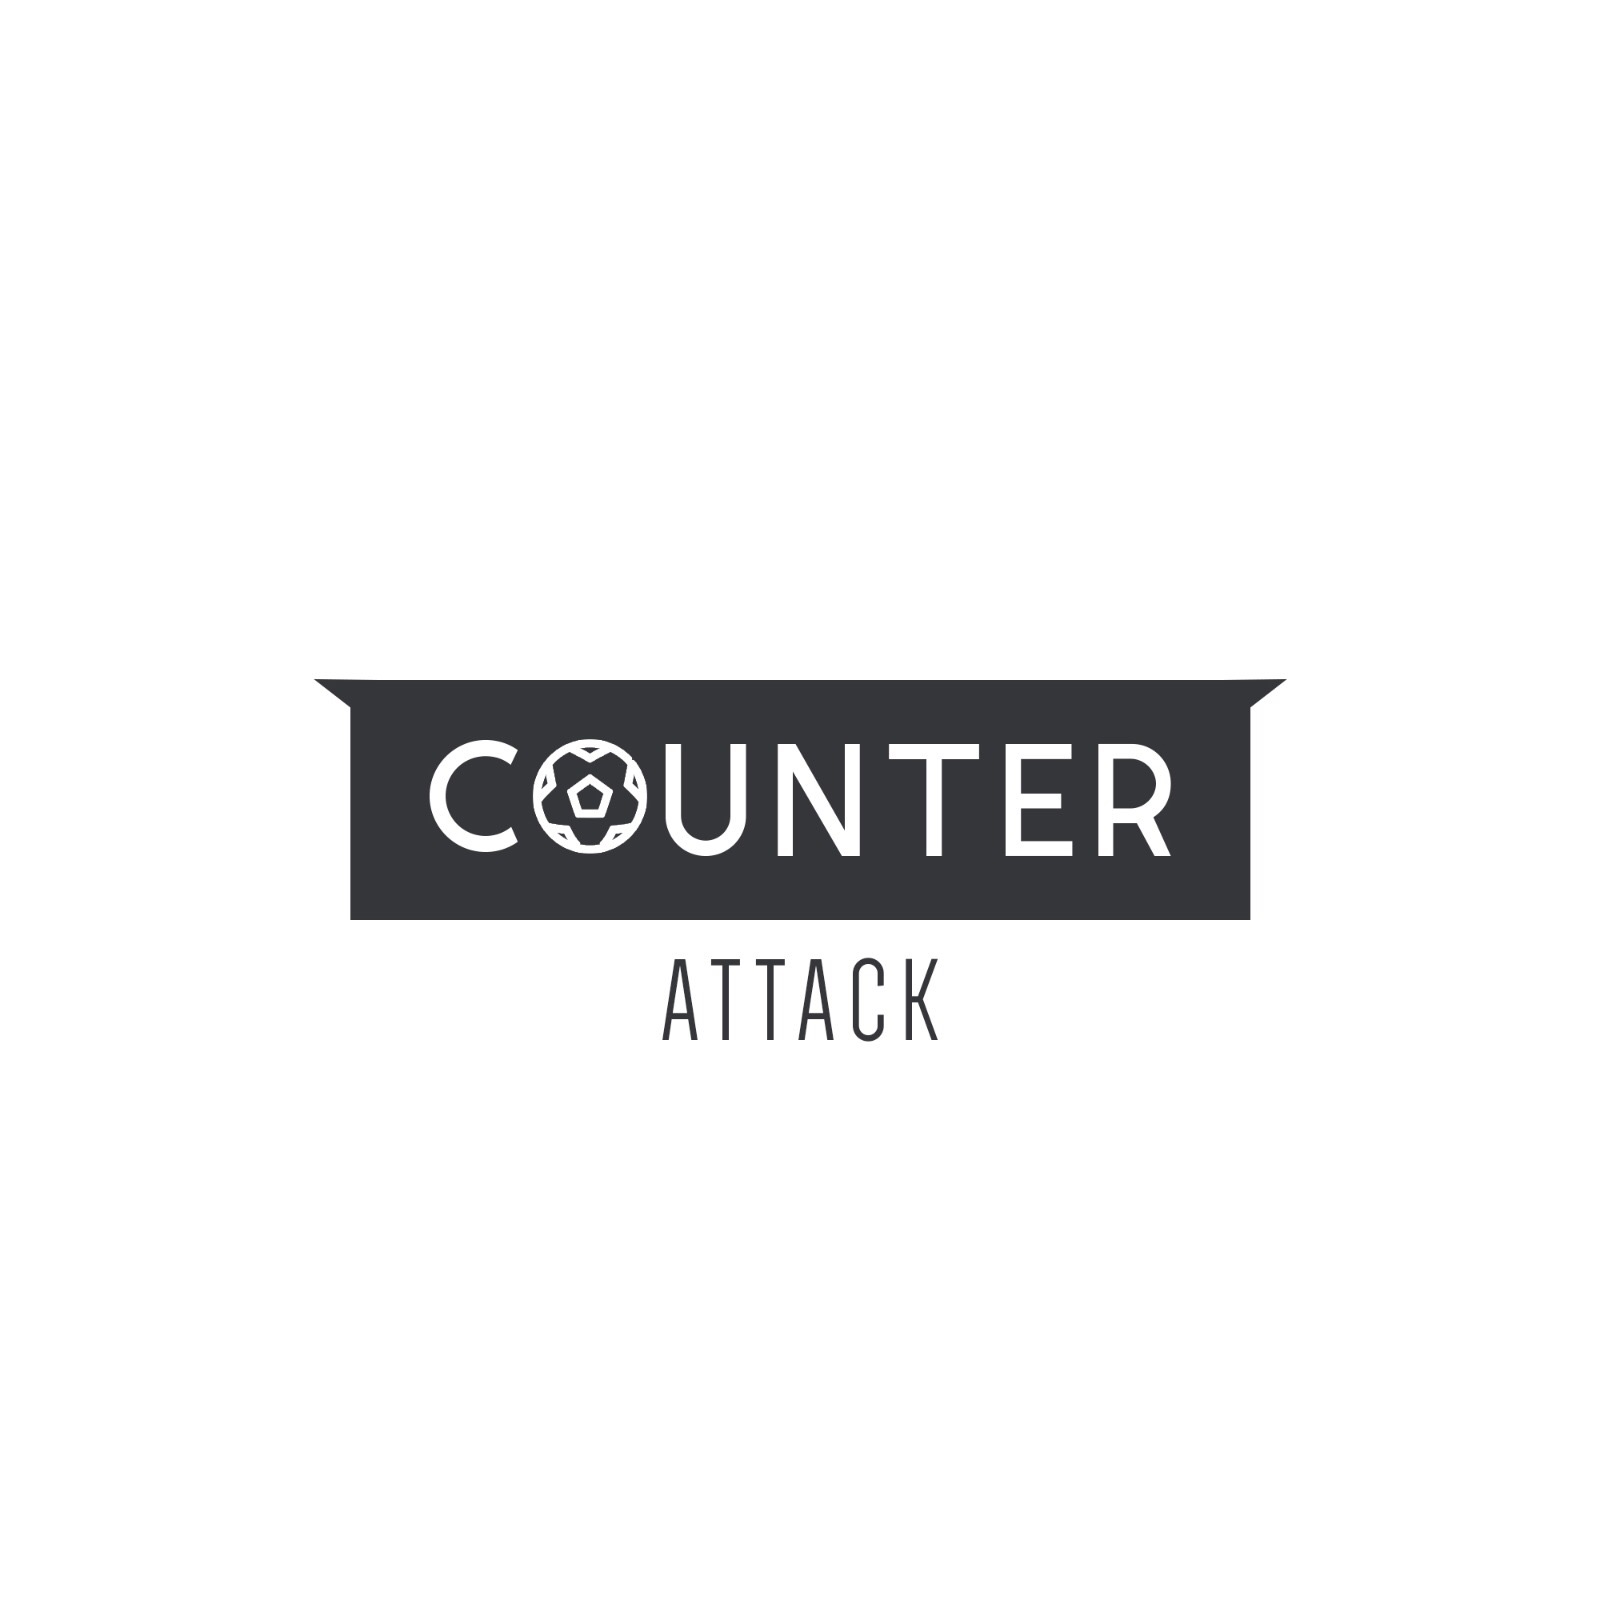 Counter Attack - Episode 139 - Manchester United Pulling Power Gone?